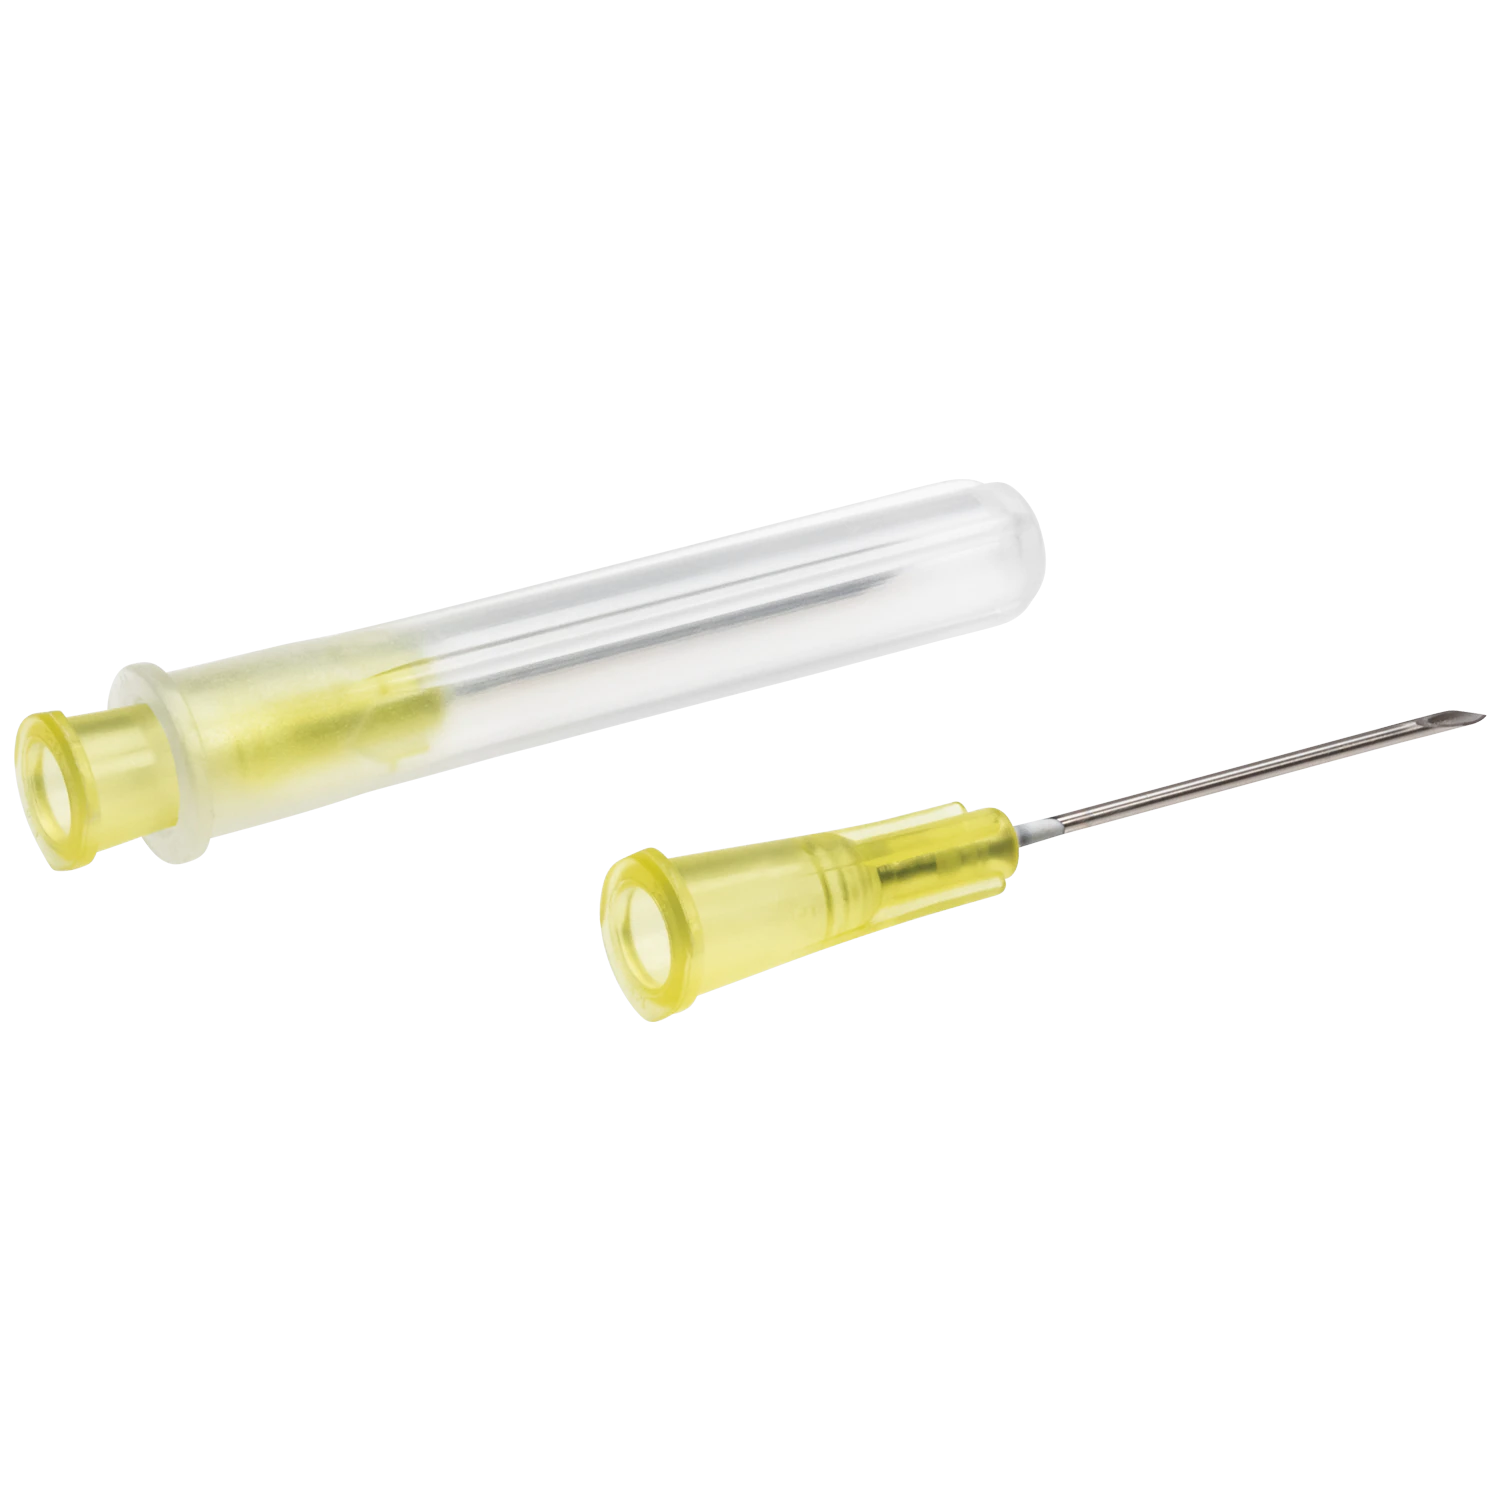 BD™ Needle 2 in. single use, sterile, 21 G - 305129 | BD